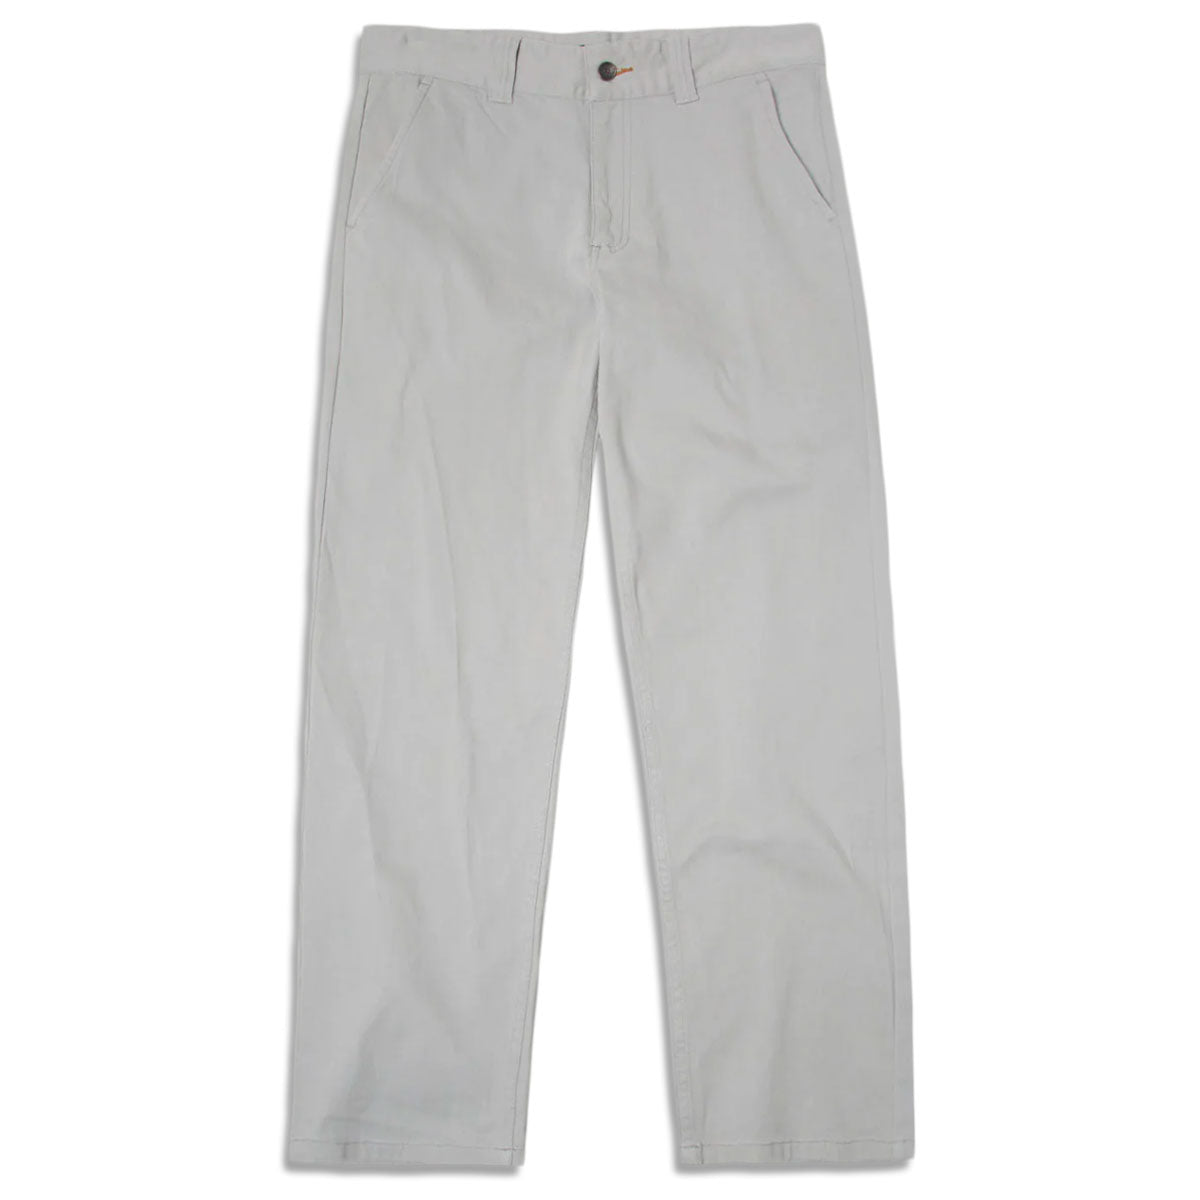 CCS Standard Plus Relaxed Chino Pants - Dove Grey image 5